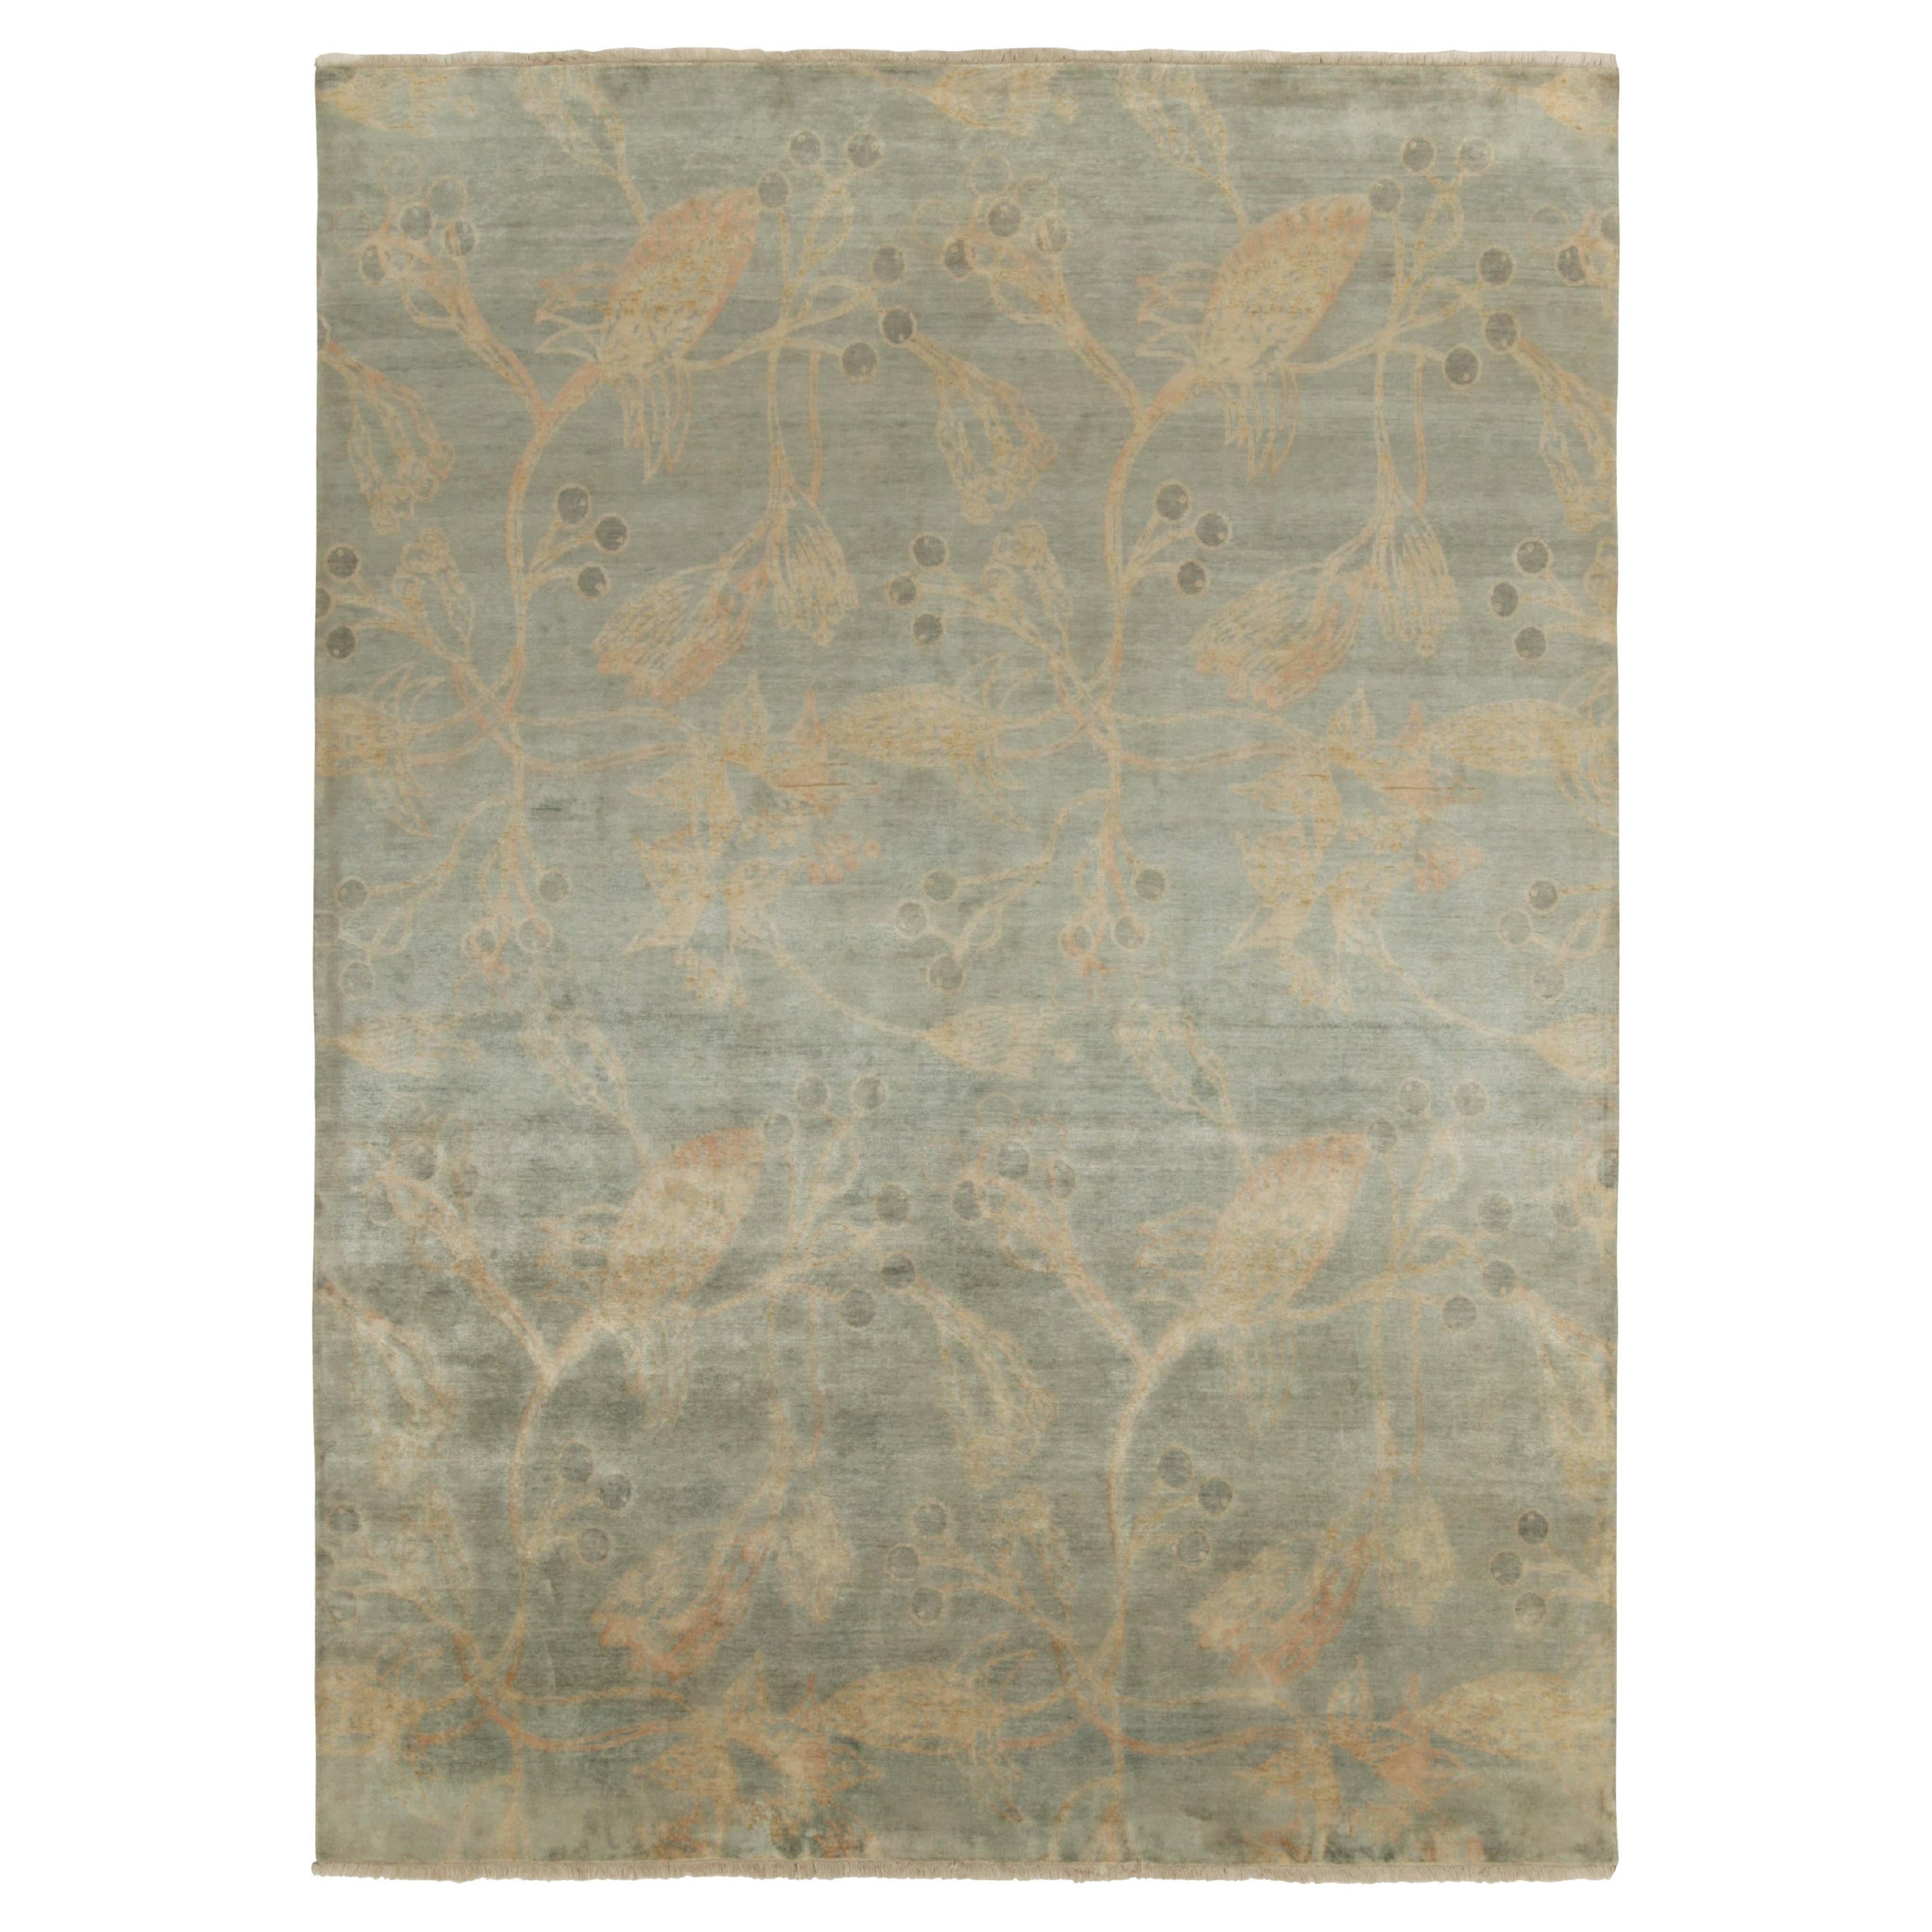 Rug & Kilim’s Contemporary Rug in Teal with Gold Floral Patterns For Sale